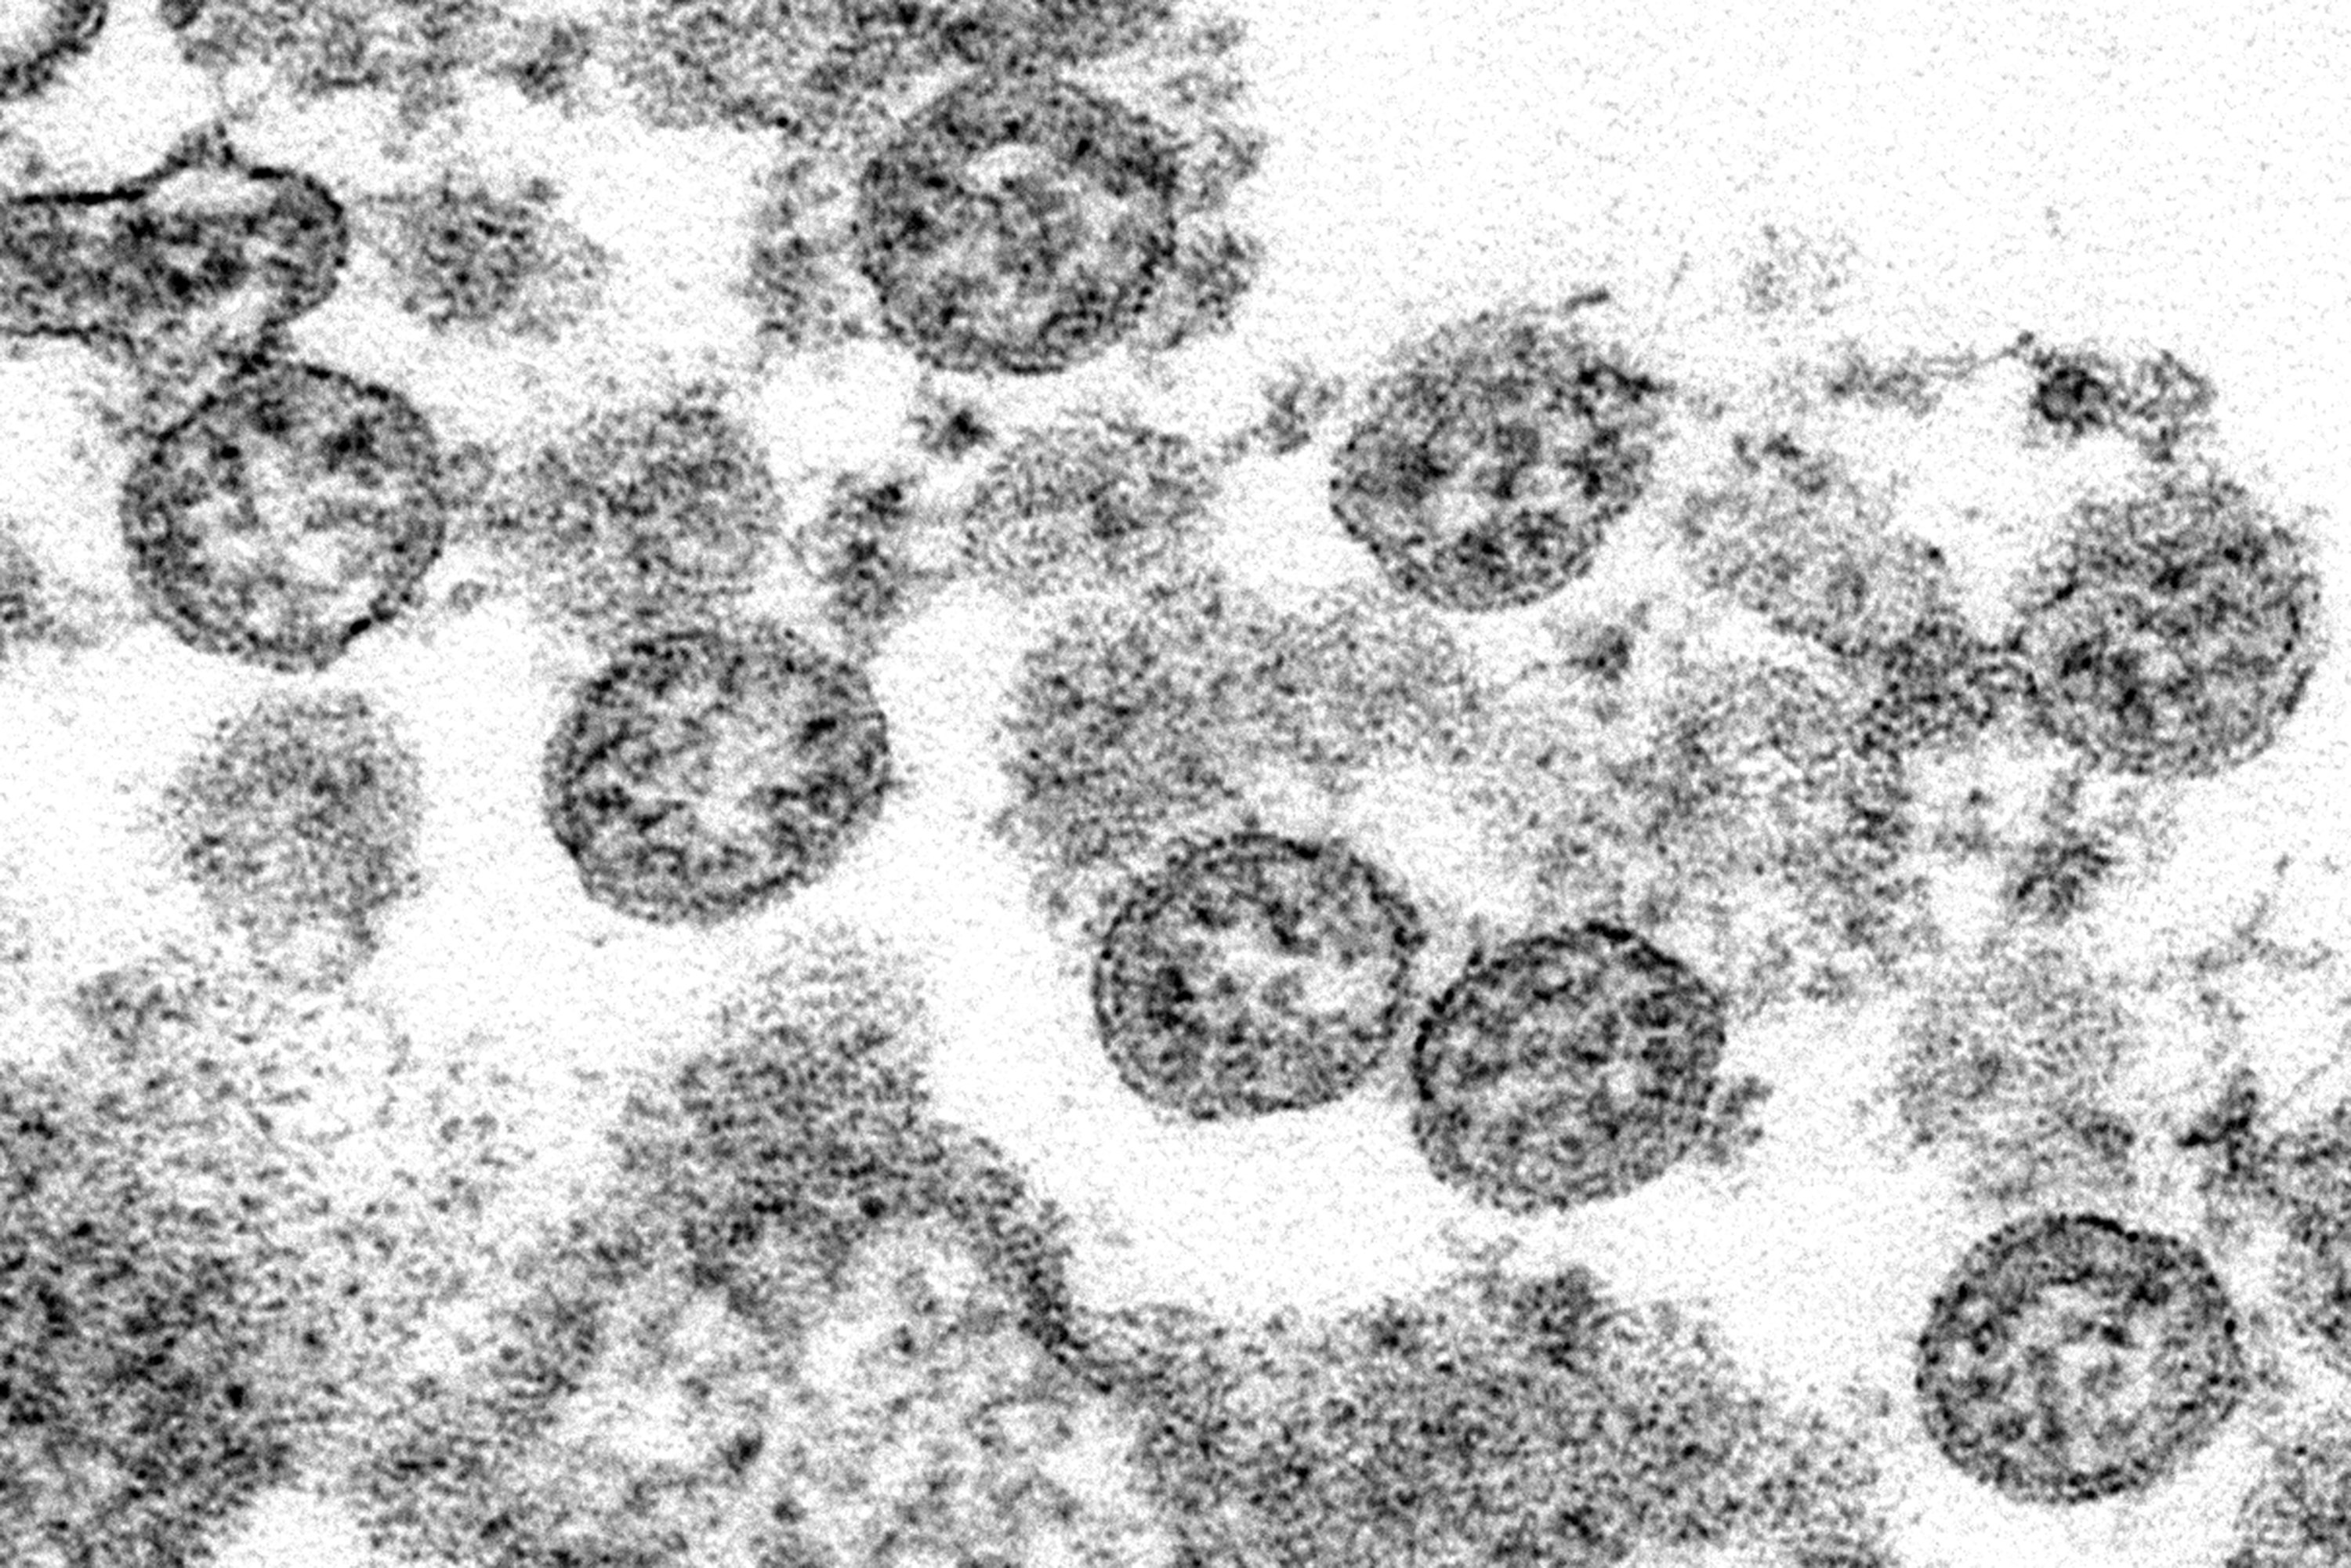 This 2020 electron microscope made available by the U.S. Centers for Disease Control and Prevention image shows the spherical coronavirus particles from the first U.S. case of COVID-19. (C.S. Goldsmith, A. Tamin/CDC via AP)